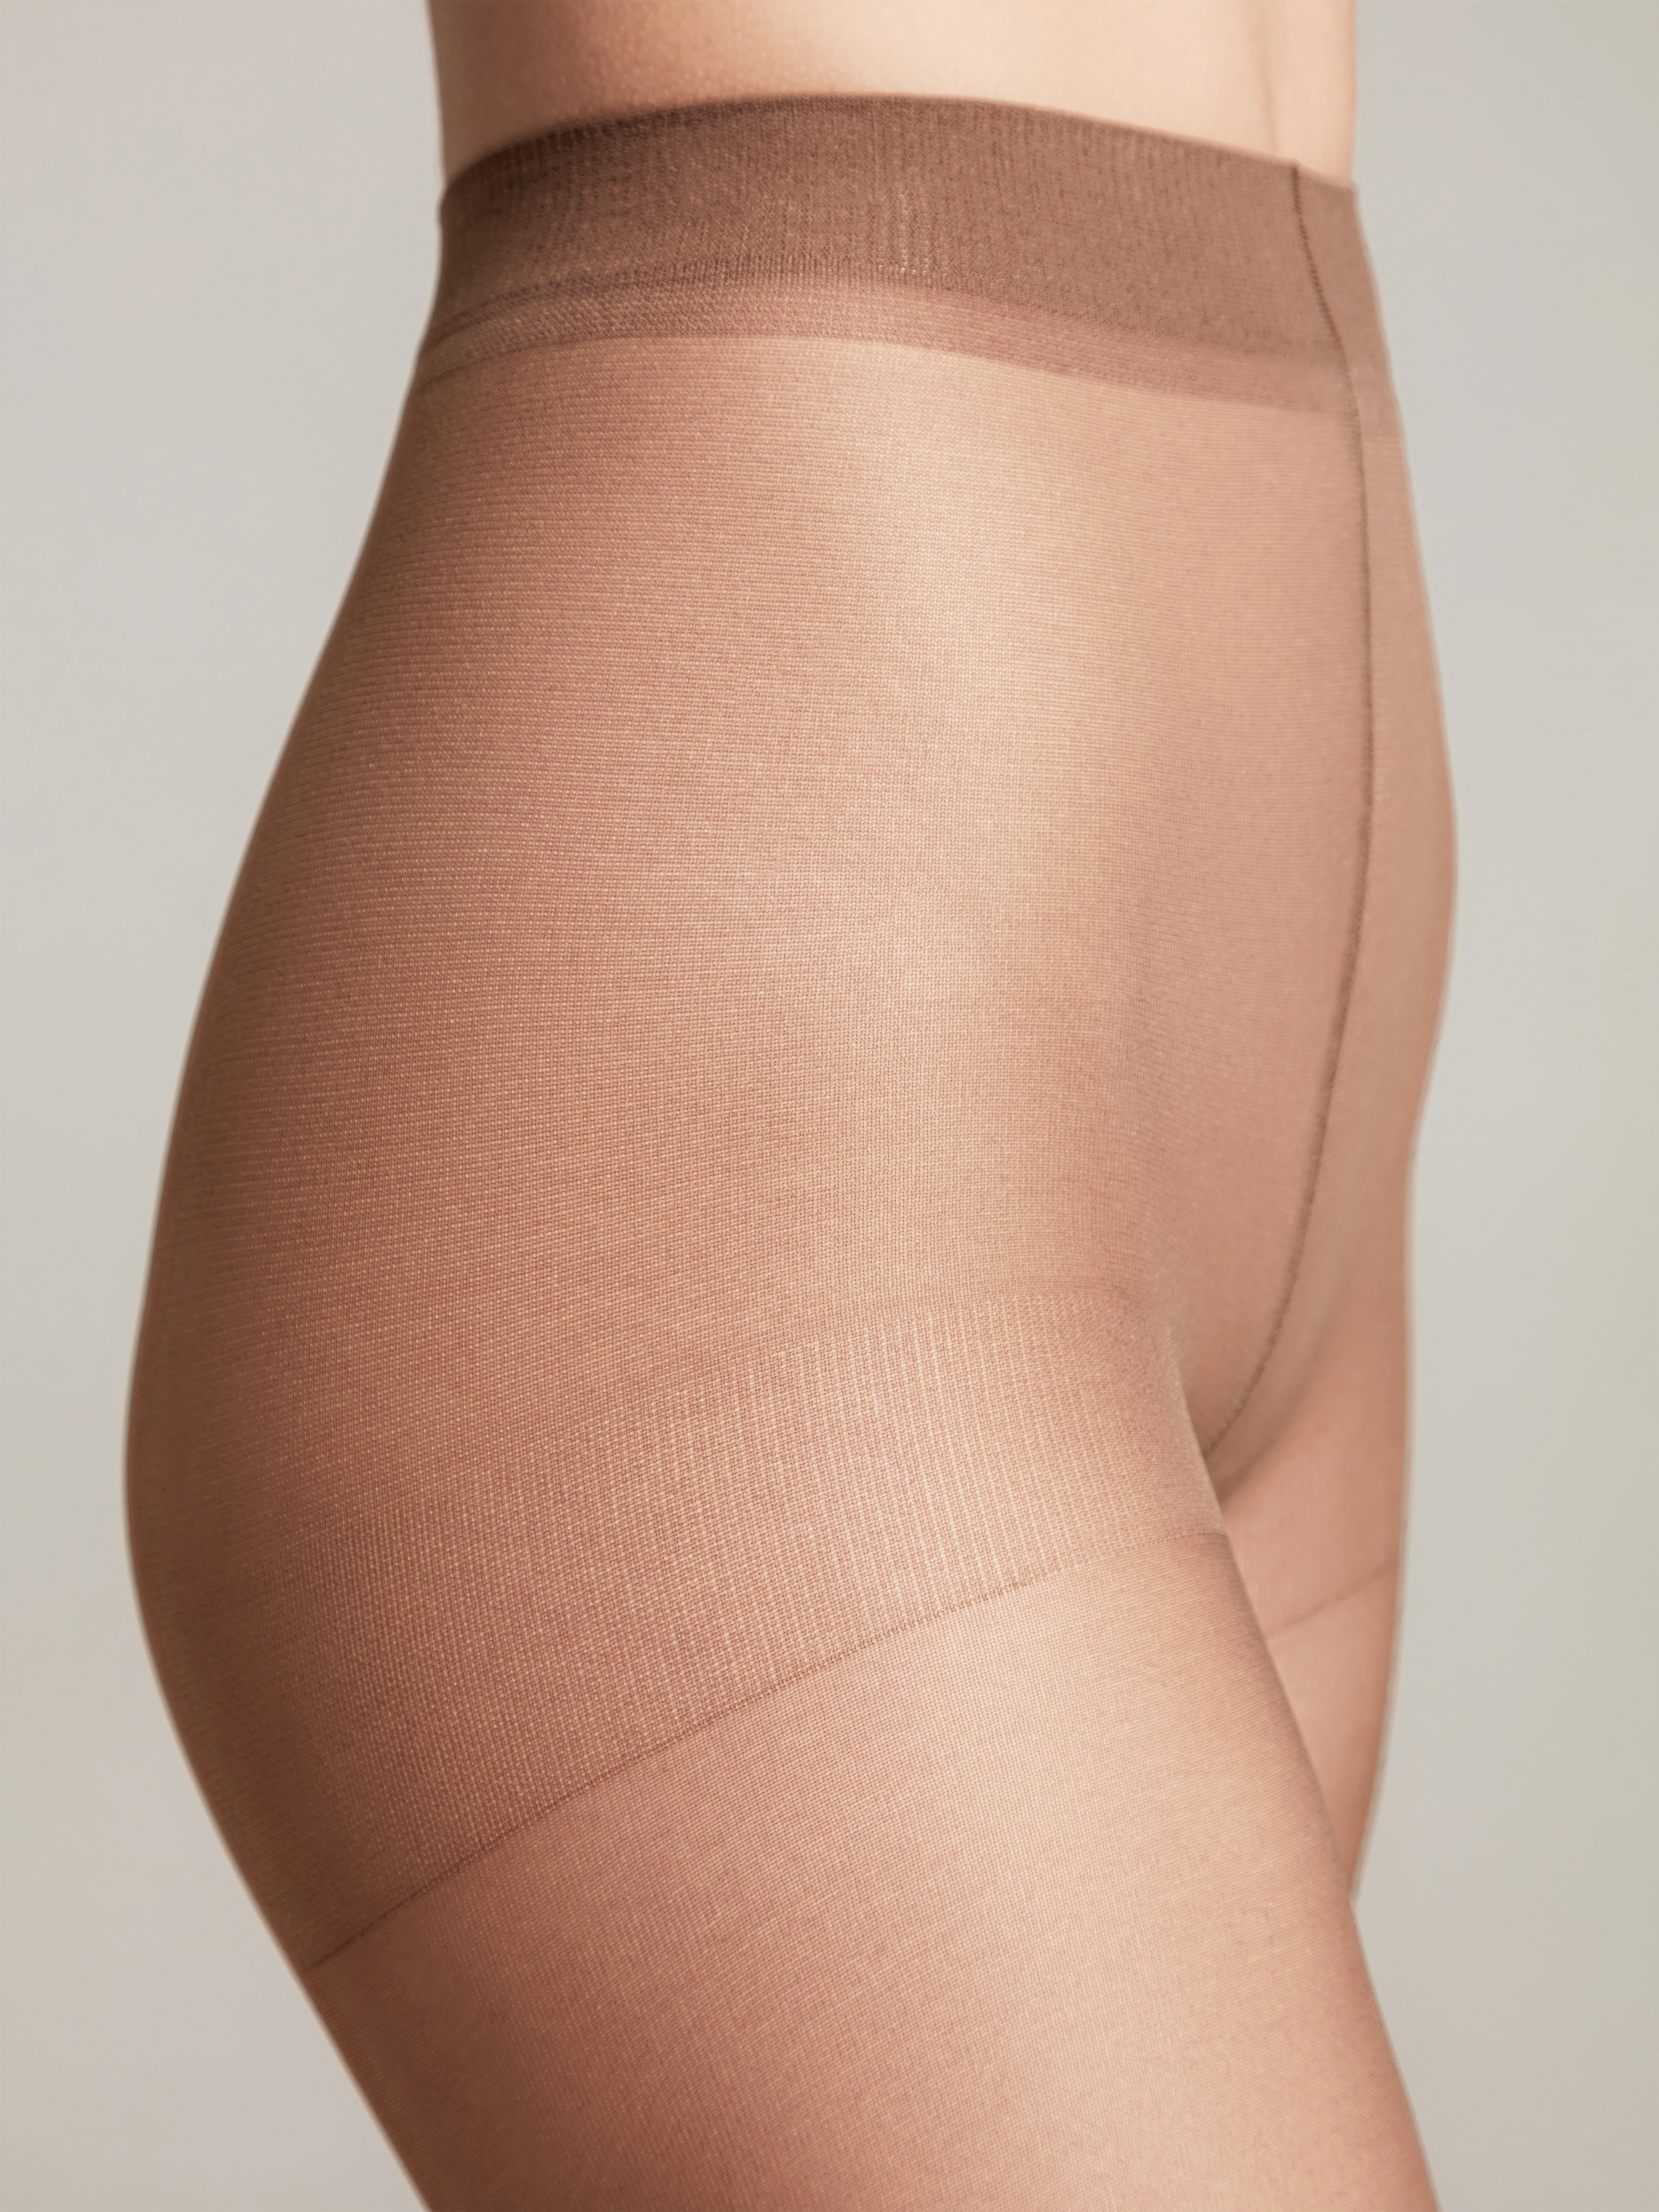 Tights Nuance 20 - Classic Matte Control Top